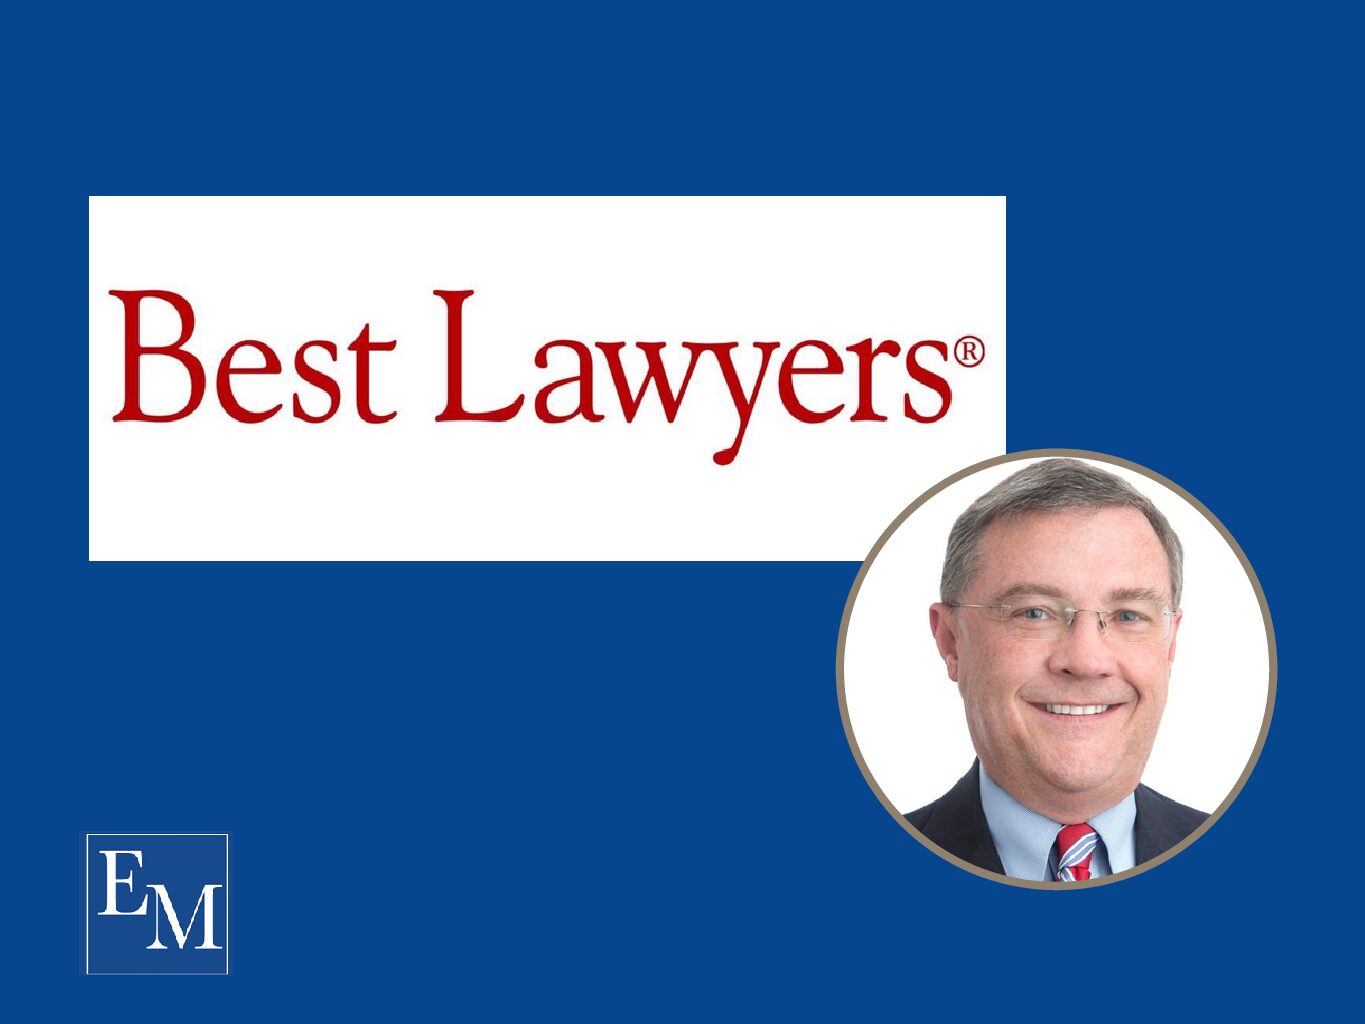 Rocky King selected in the 26th Edition of The Best Lawyers in America